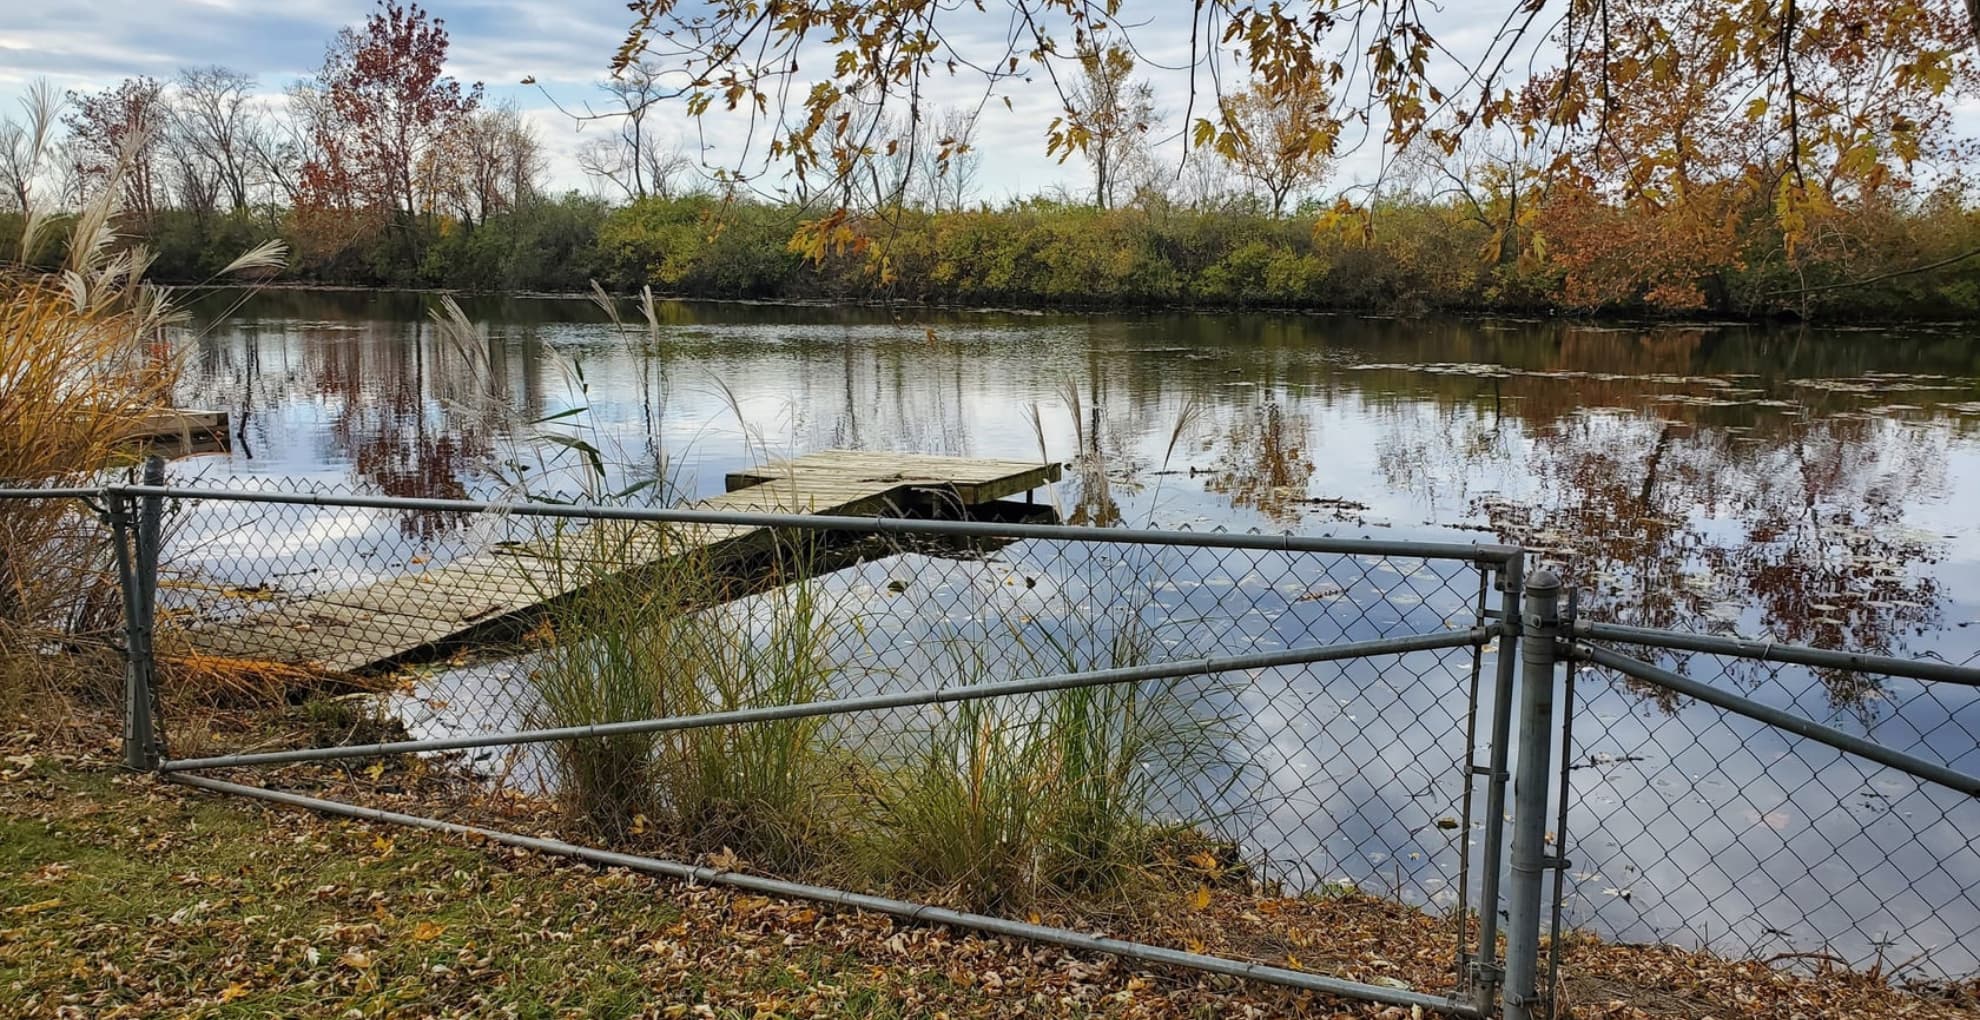 Lake with a fence in front